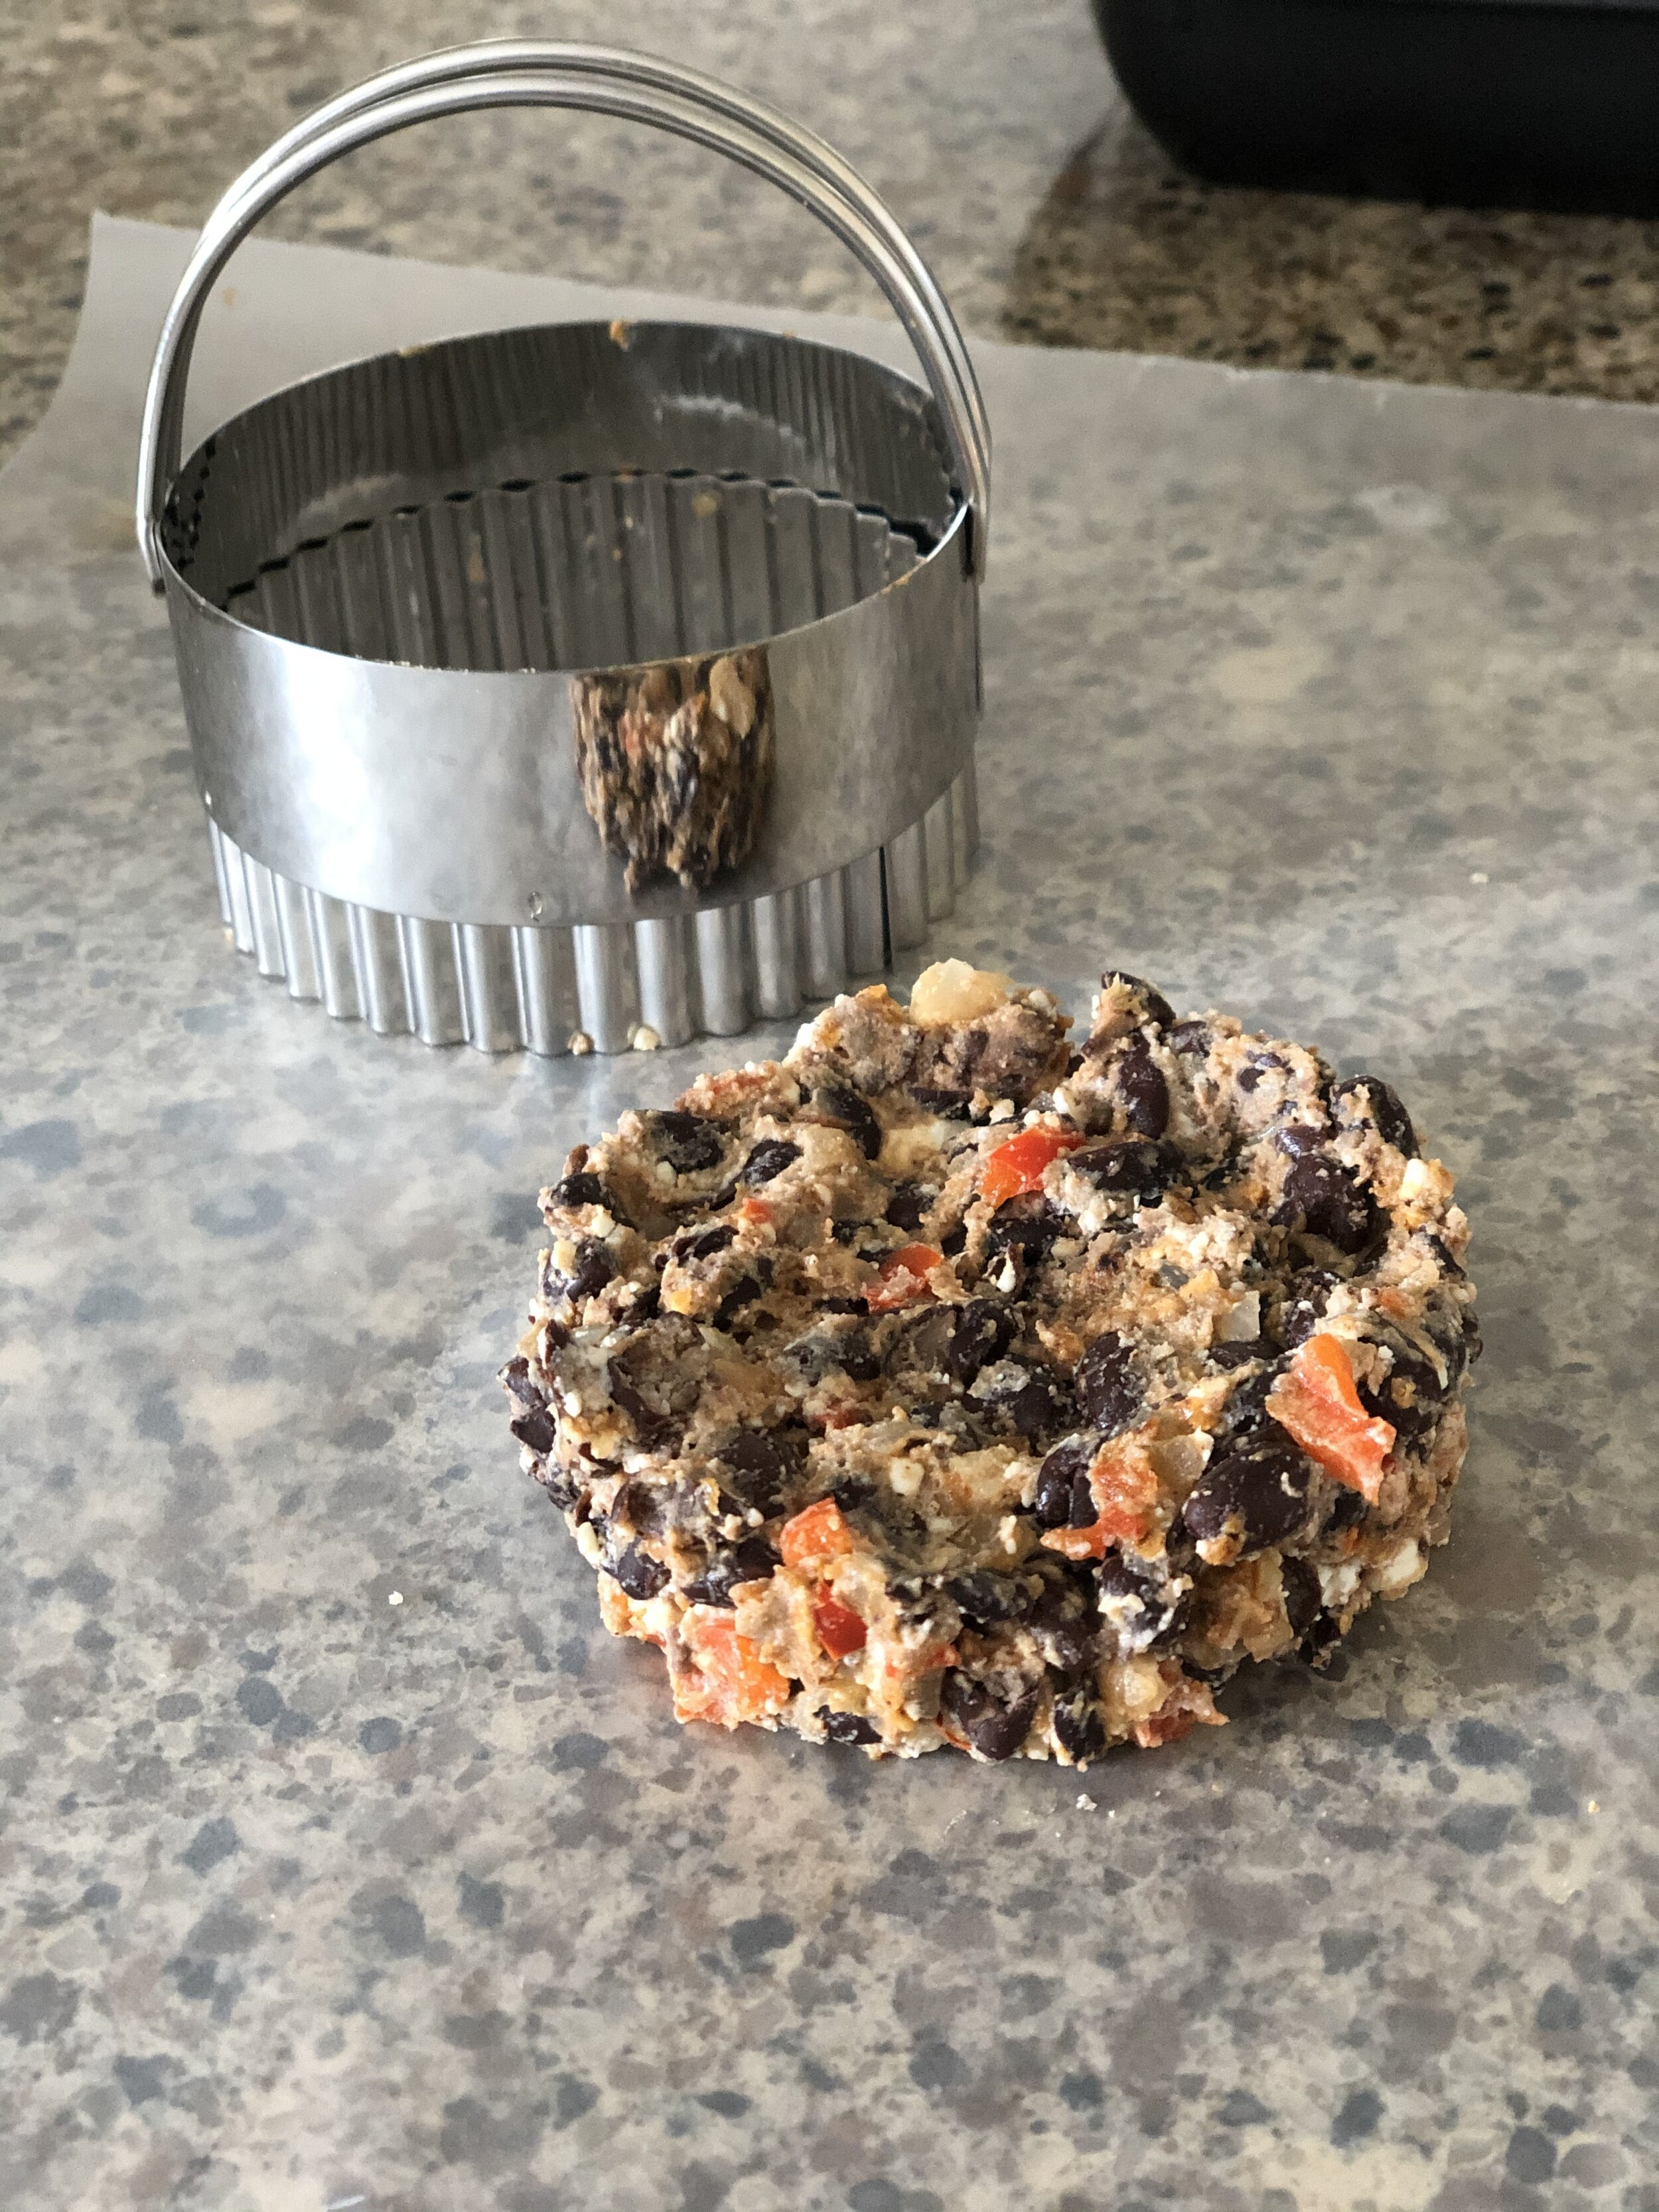 Form black bean burgers in a large biscuit cutter